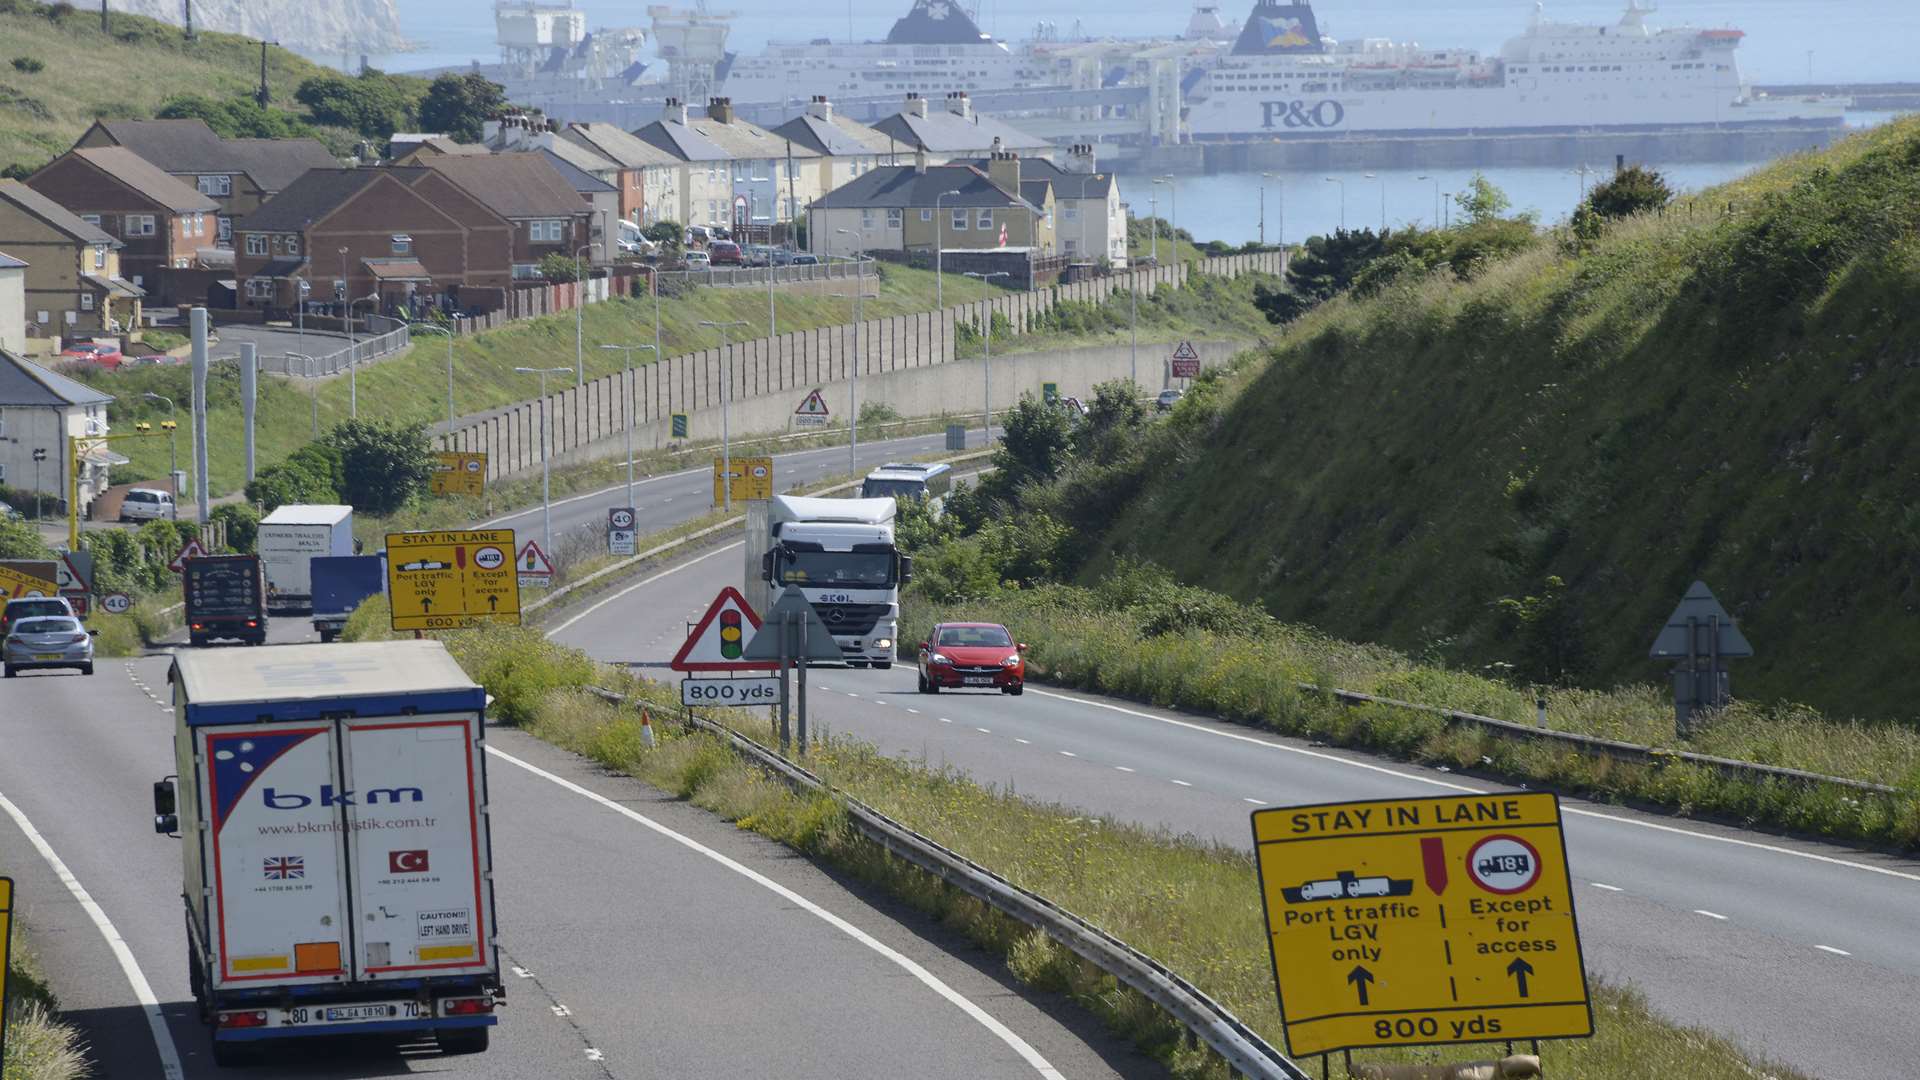 The A20 towards Dover when the 40mph limit was in force